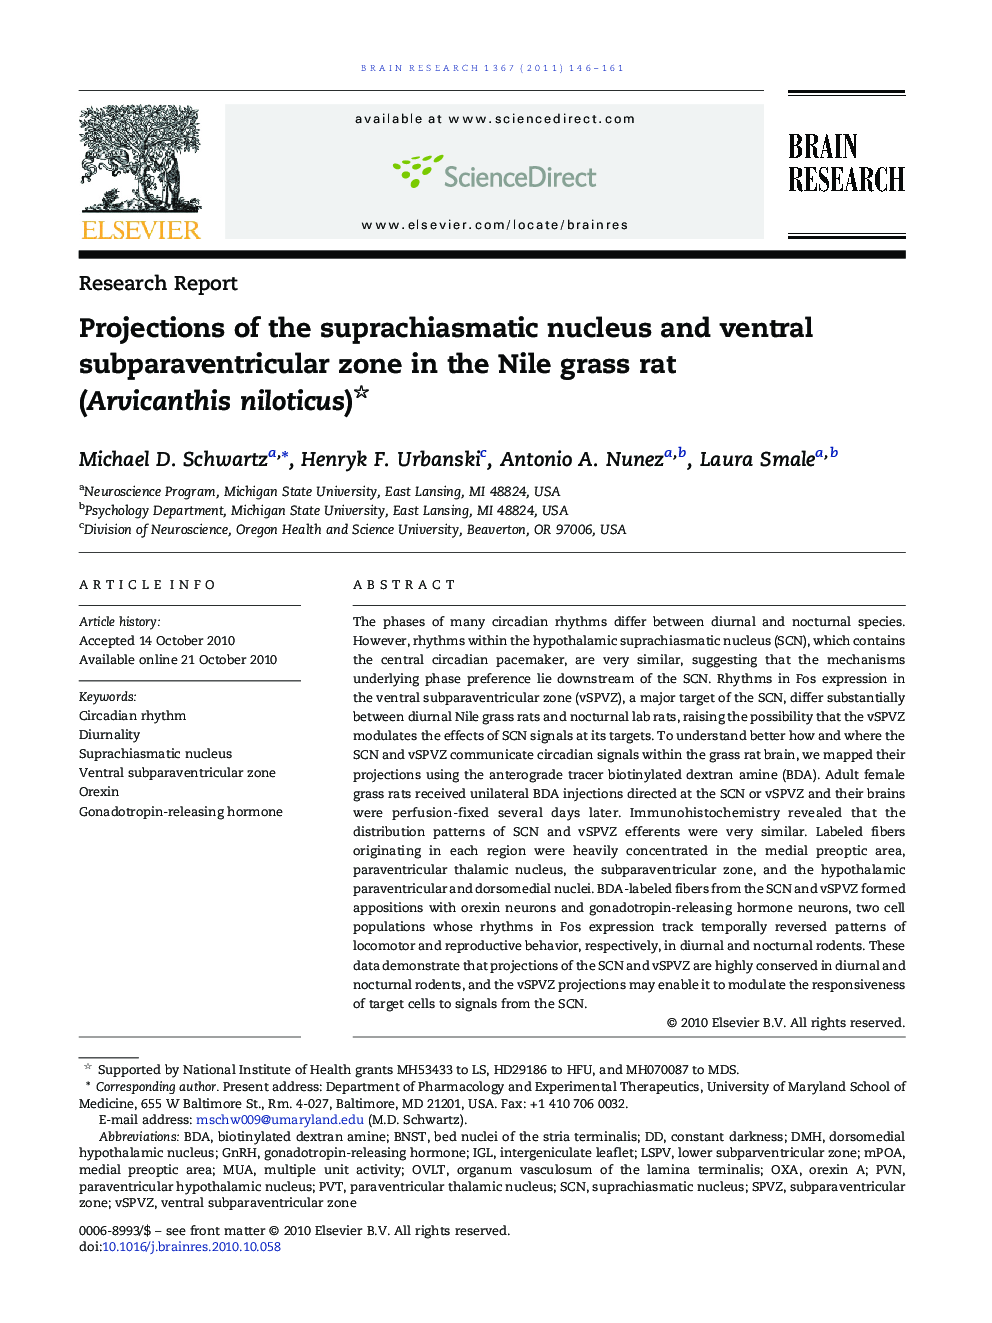 Research ReportProjections of the suprachiasmatic nucleus and ventral subparaventricular zone in the Nile grass rat (Arvicanthis niloticus)